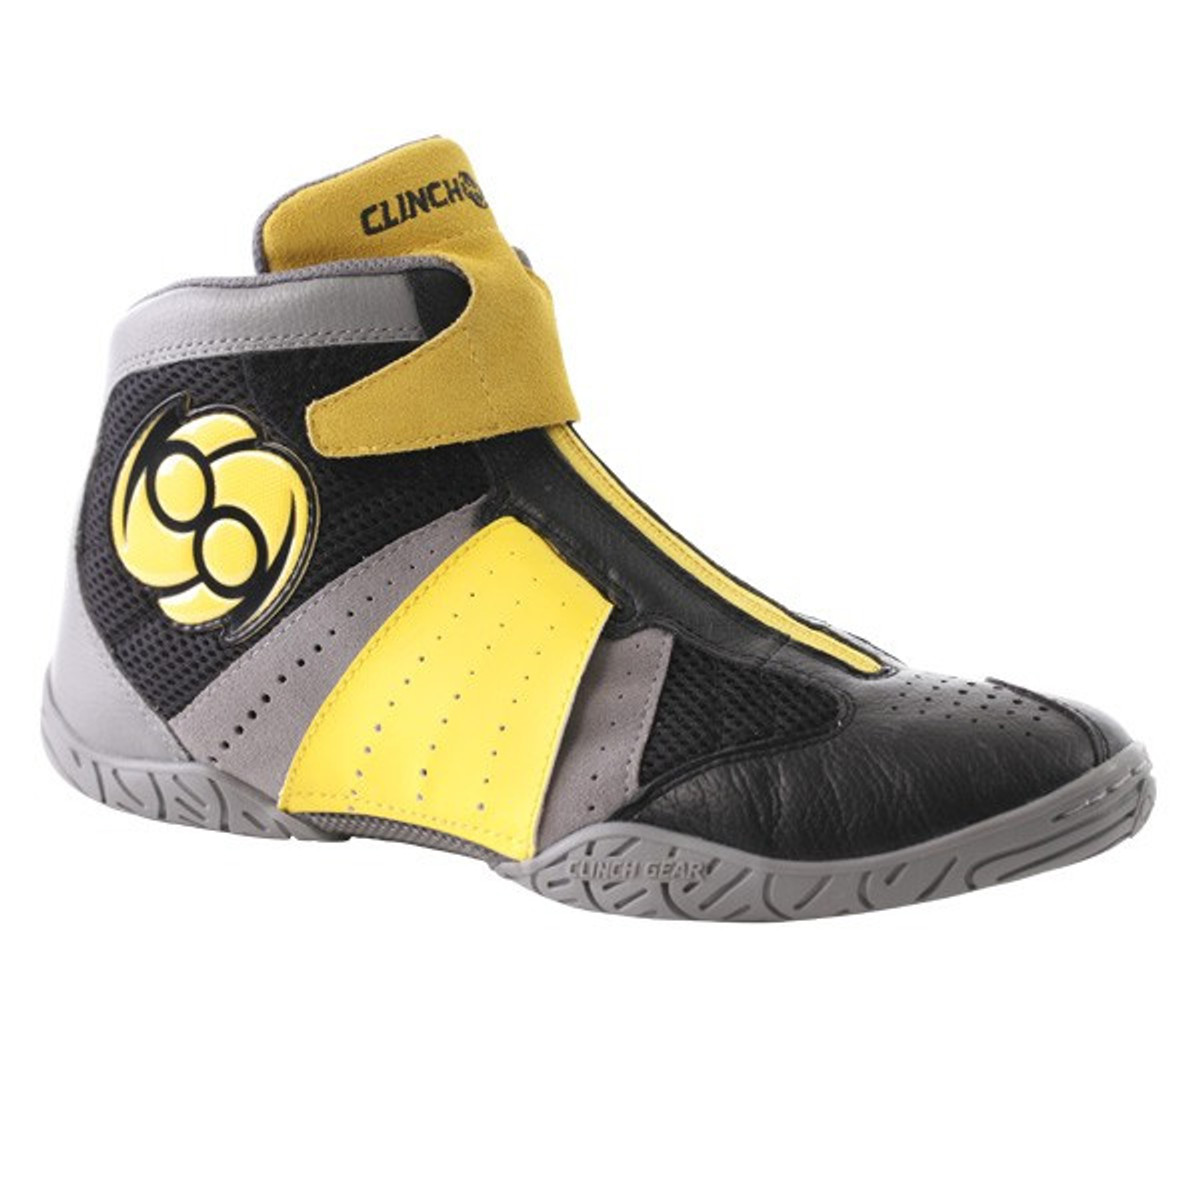 wrestling shoes yellow